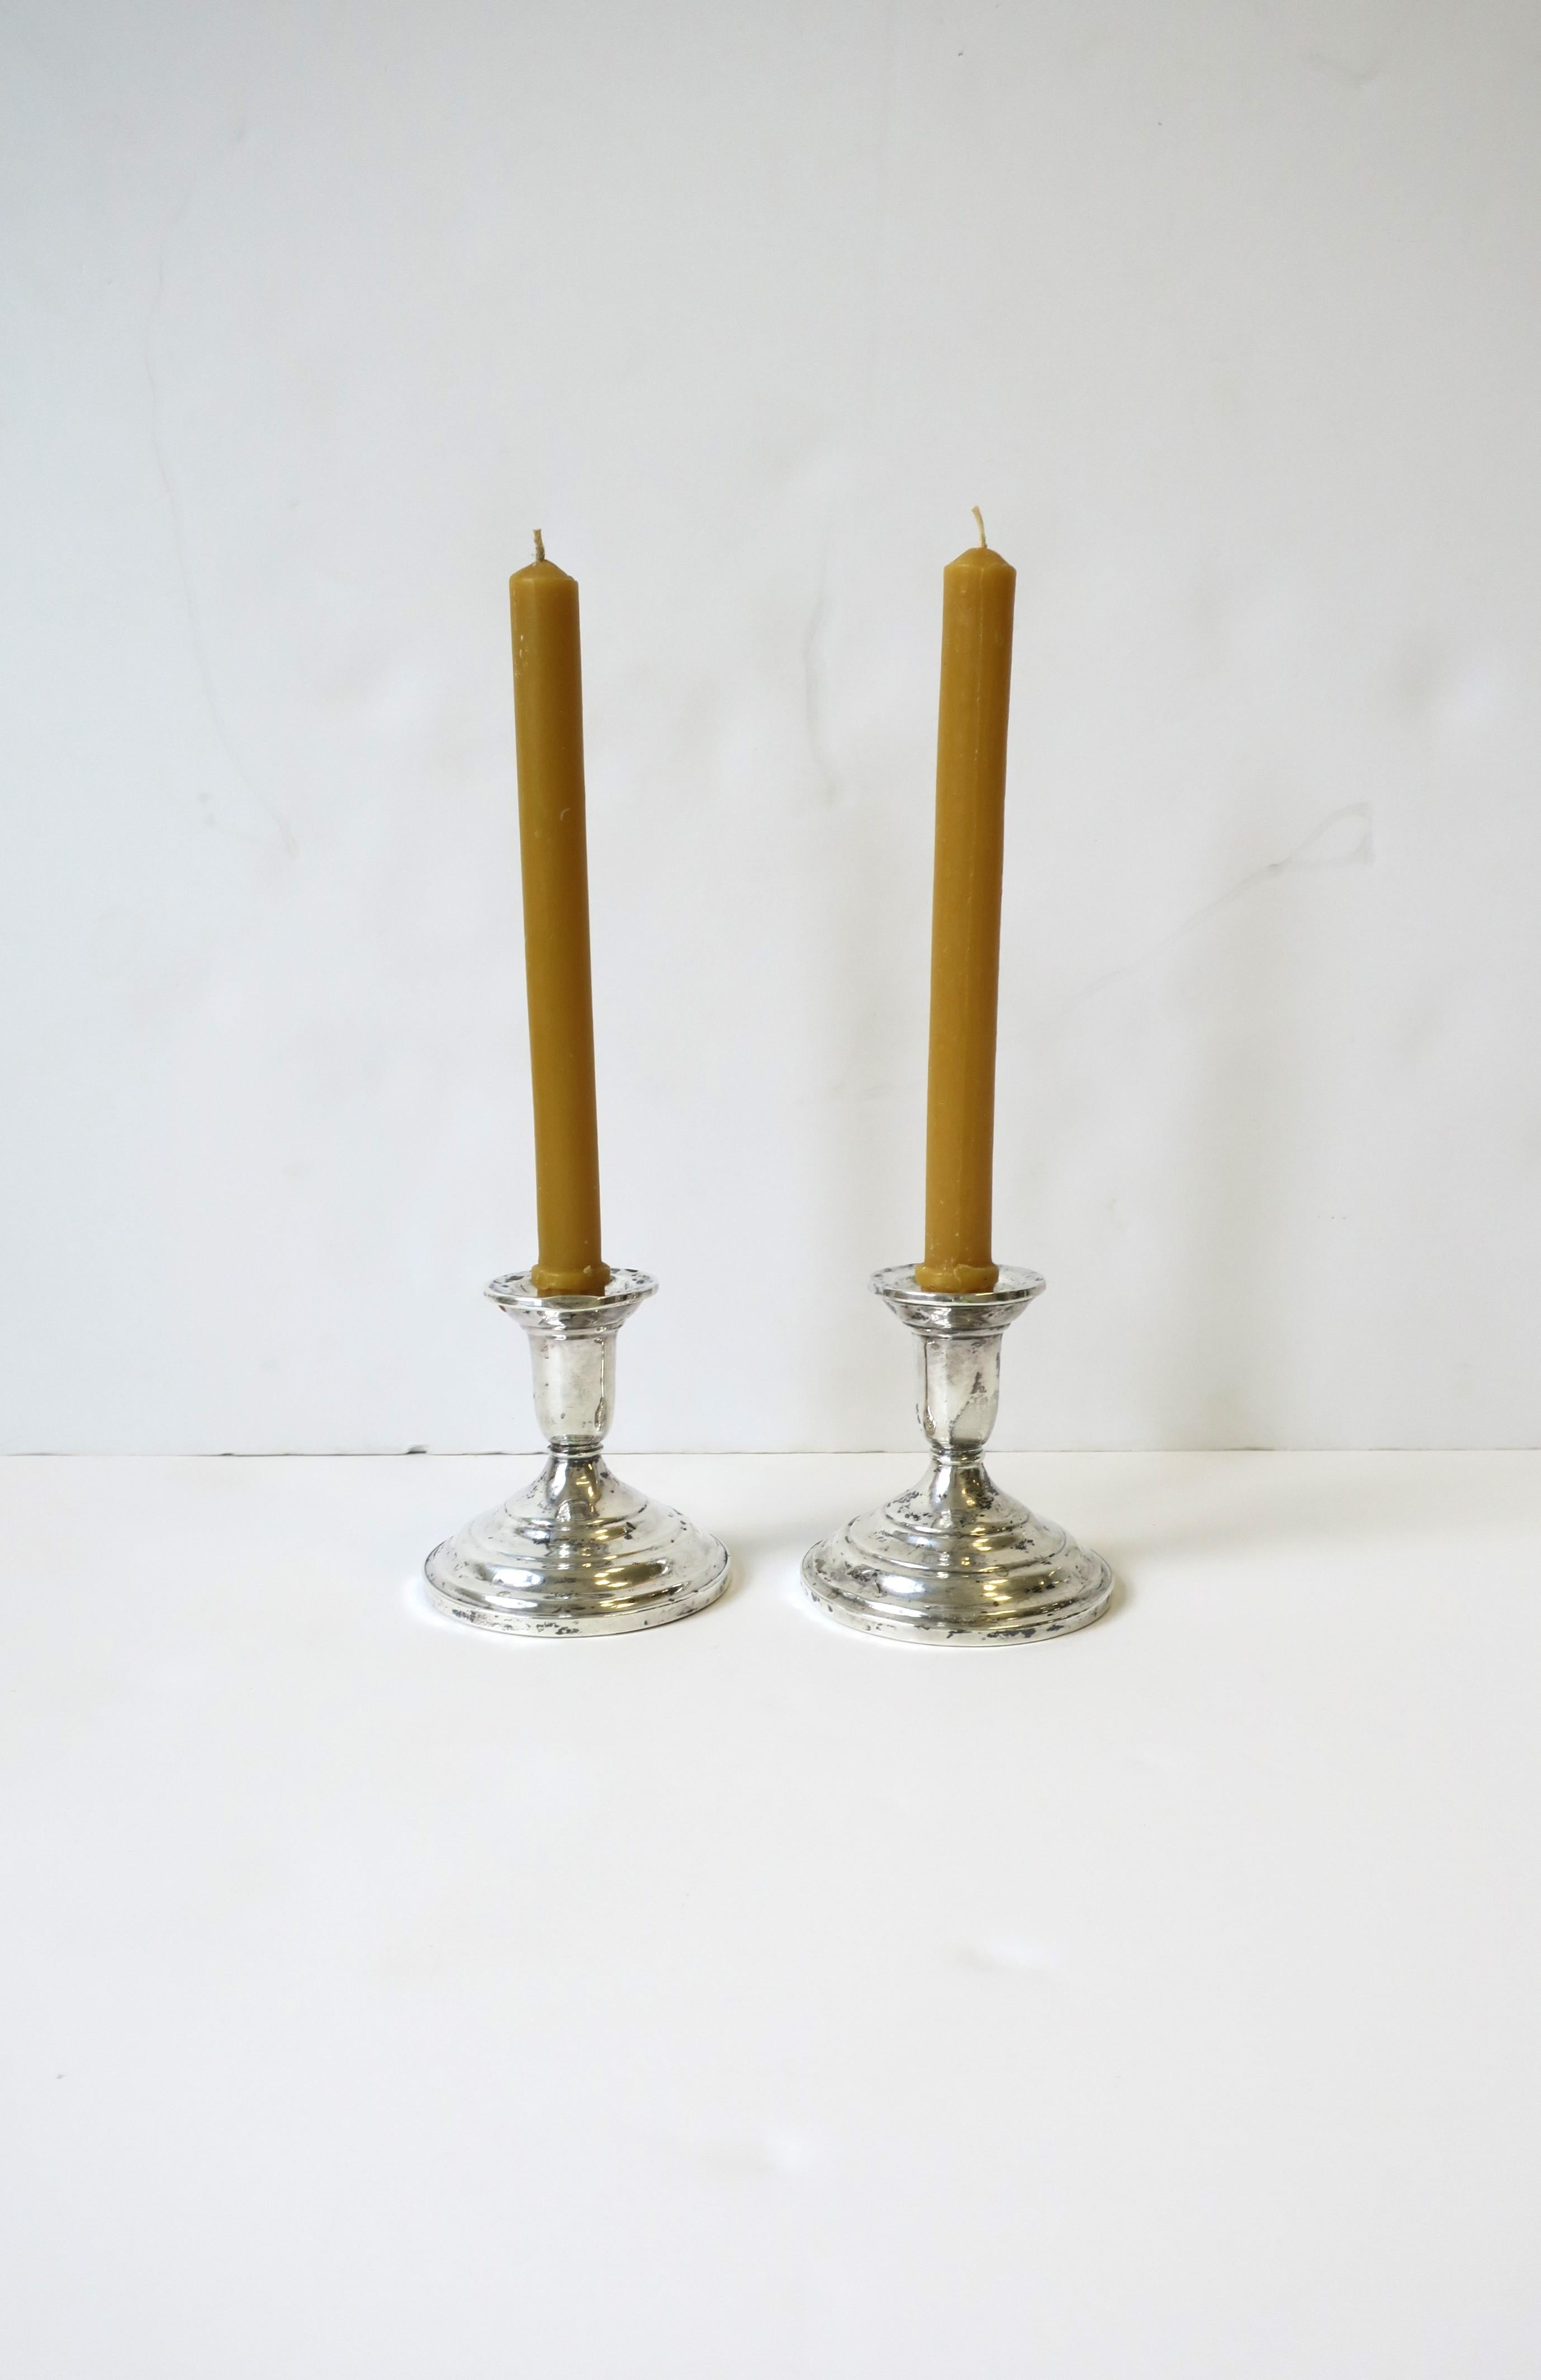 A pair of versatile sterling silver candlestick holders, circa 1960s, mid-20th century. A pleasure for any dining table. Makers' mark and marked 'Sterling' on bottom as shown. 

Dimensions: 3.44